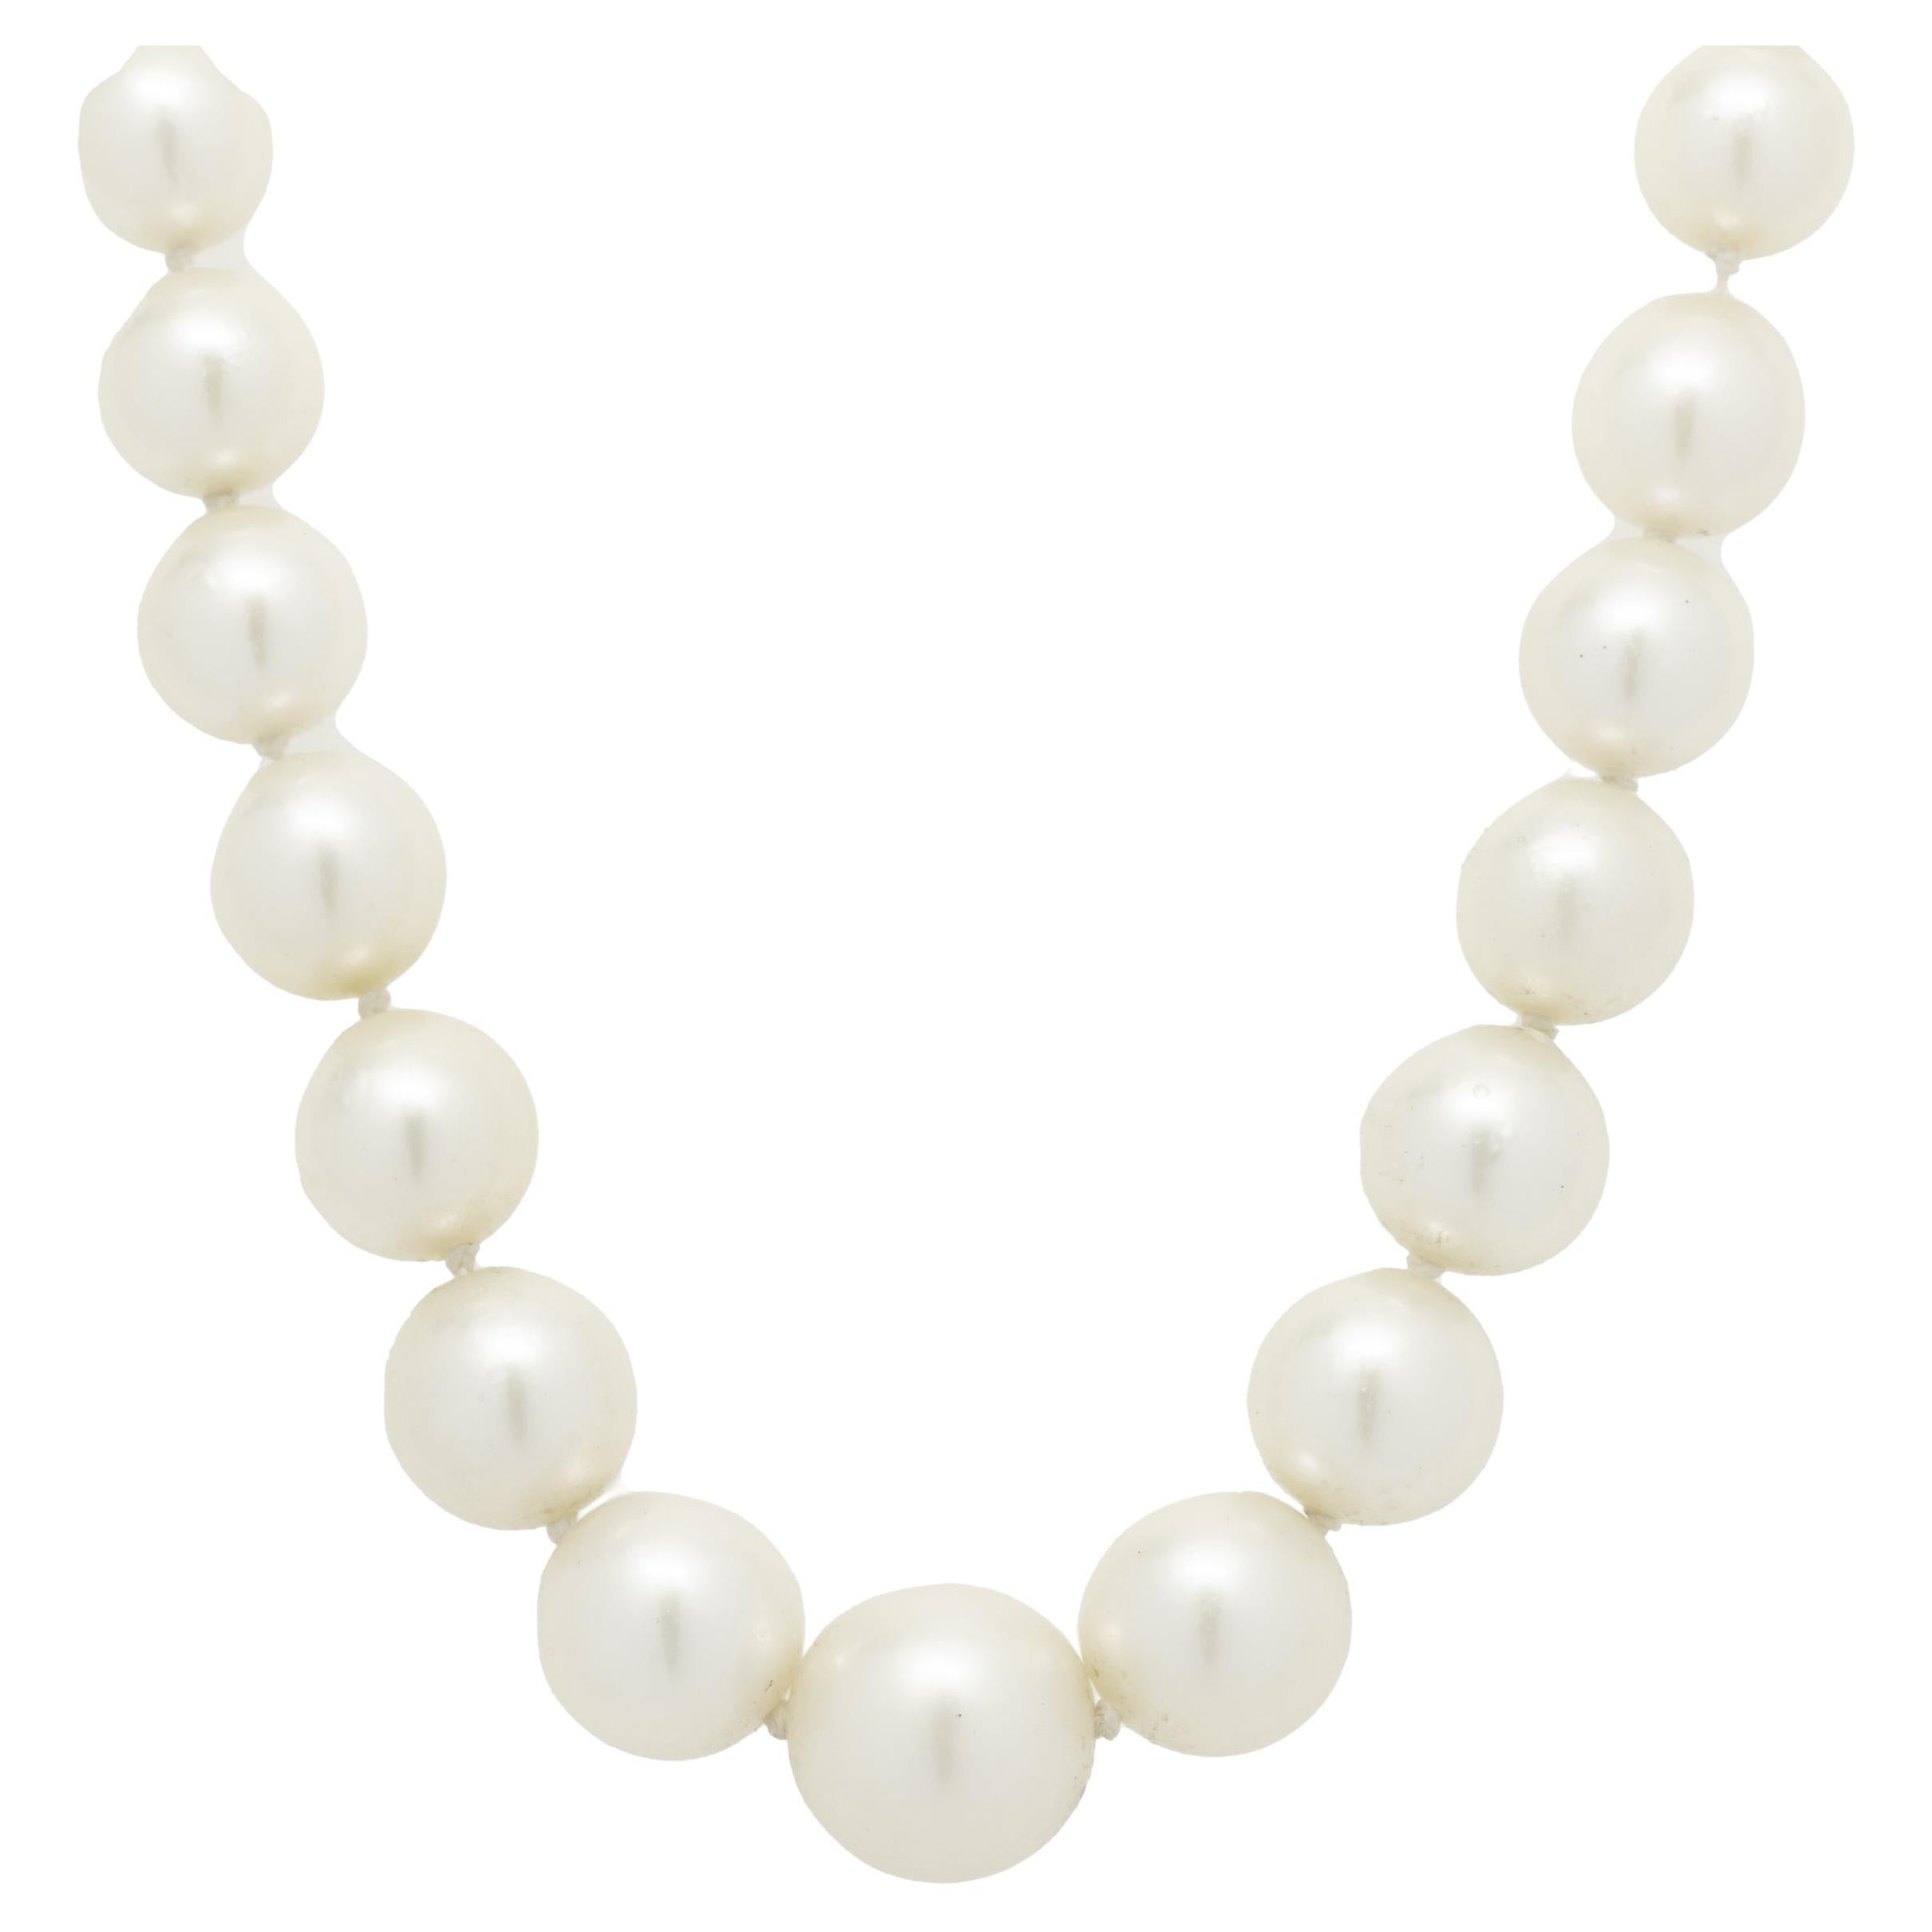 18 Karat Two Tone Graduated Fresh Water Pearl Necklace